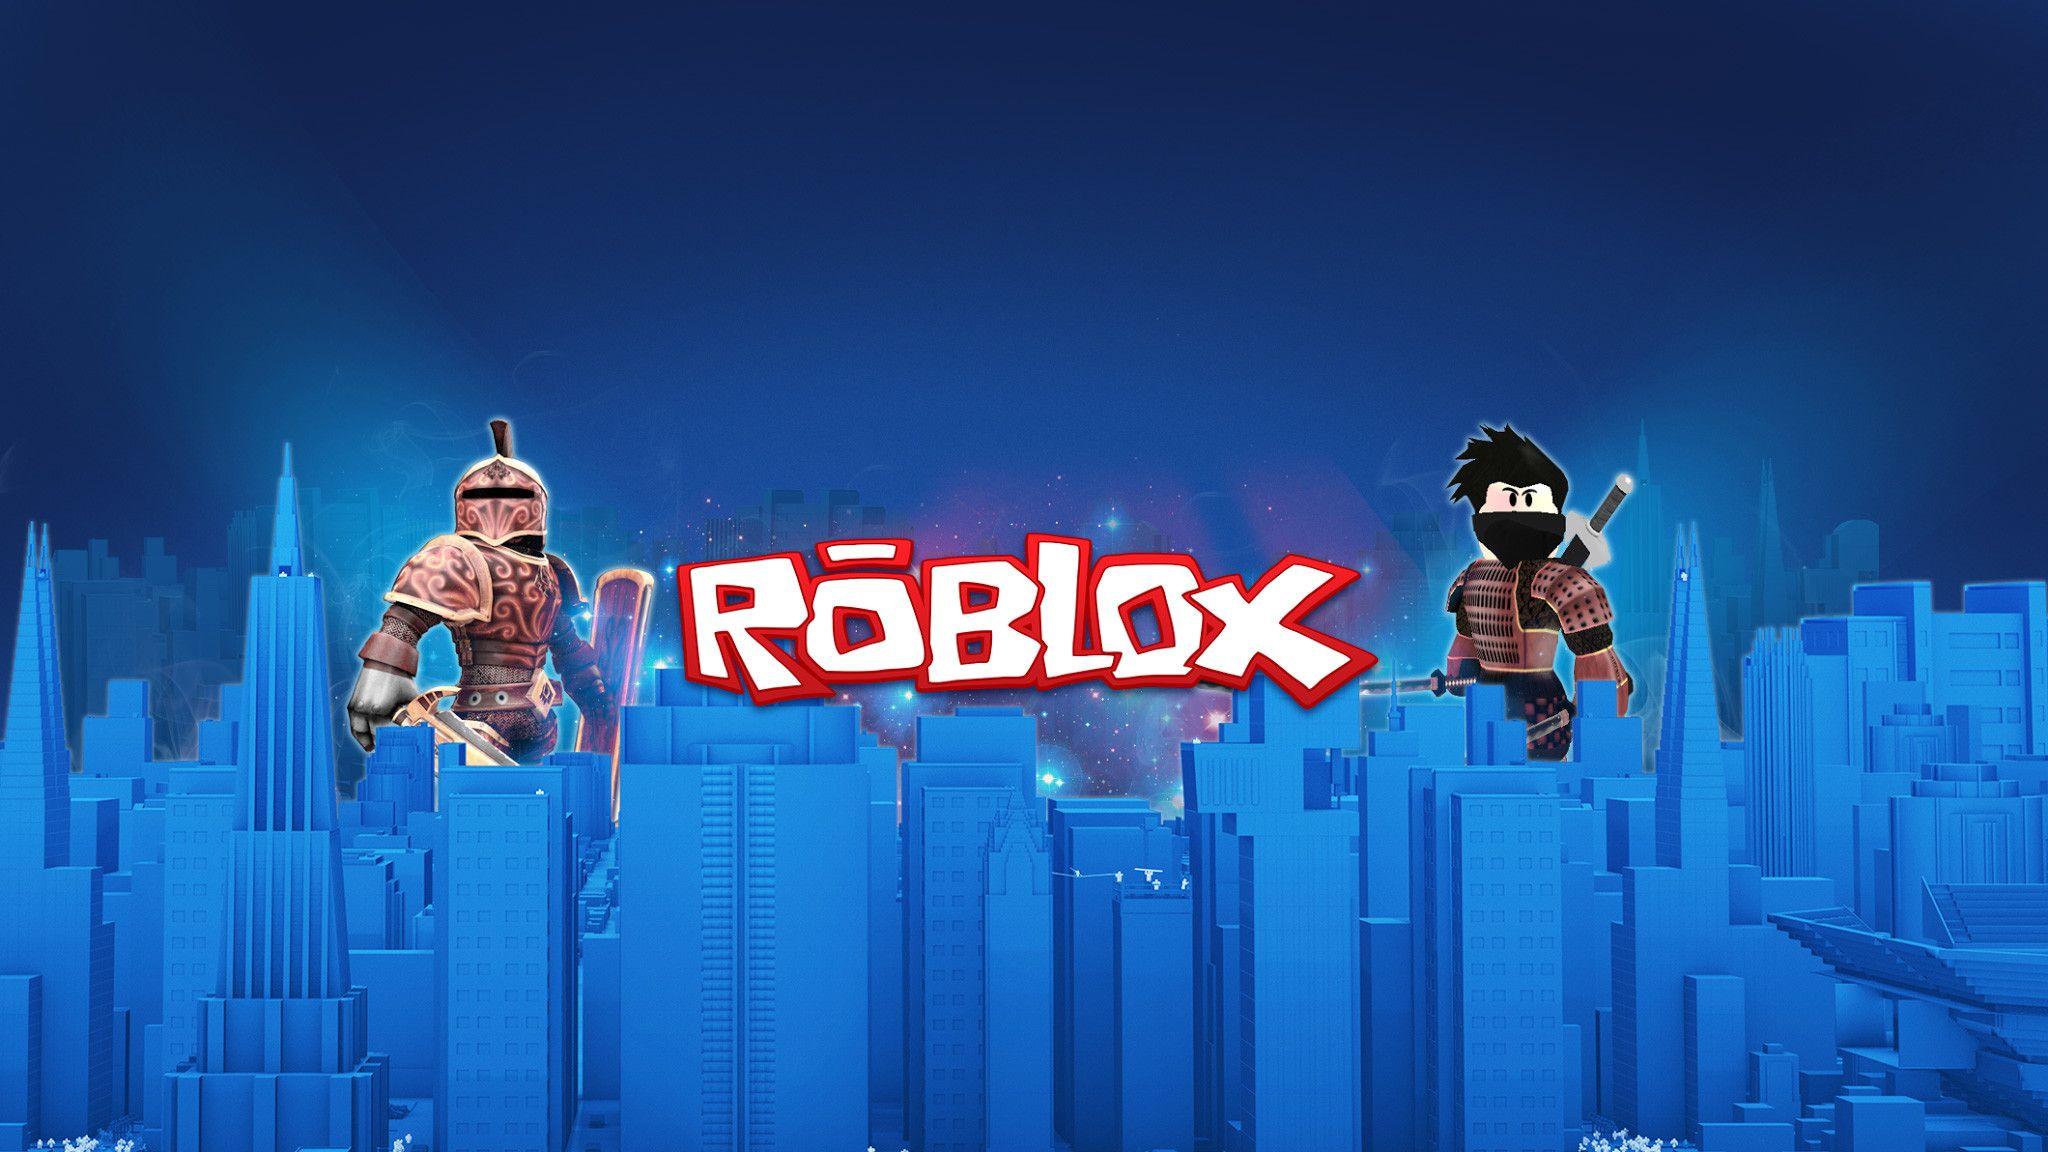 Cute Roblox Wallpapers Top Free Cute Roblox Backgrounds Wallpaperaccess - home screen cute roblox wallpapers for girls